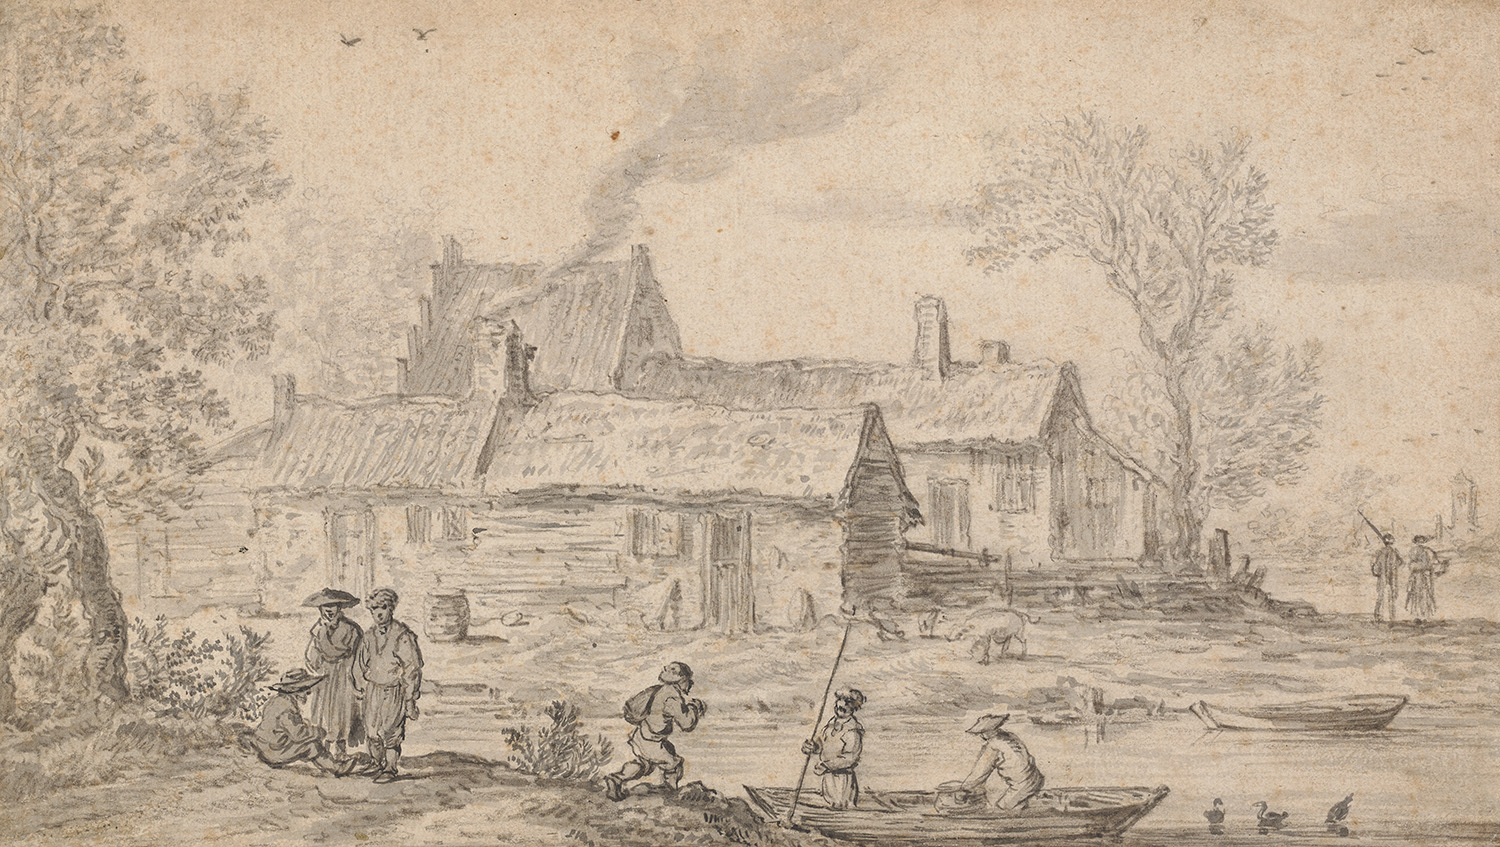 A sketch of a group of houses with people in the foreground